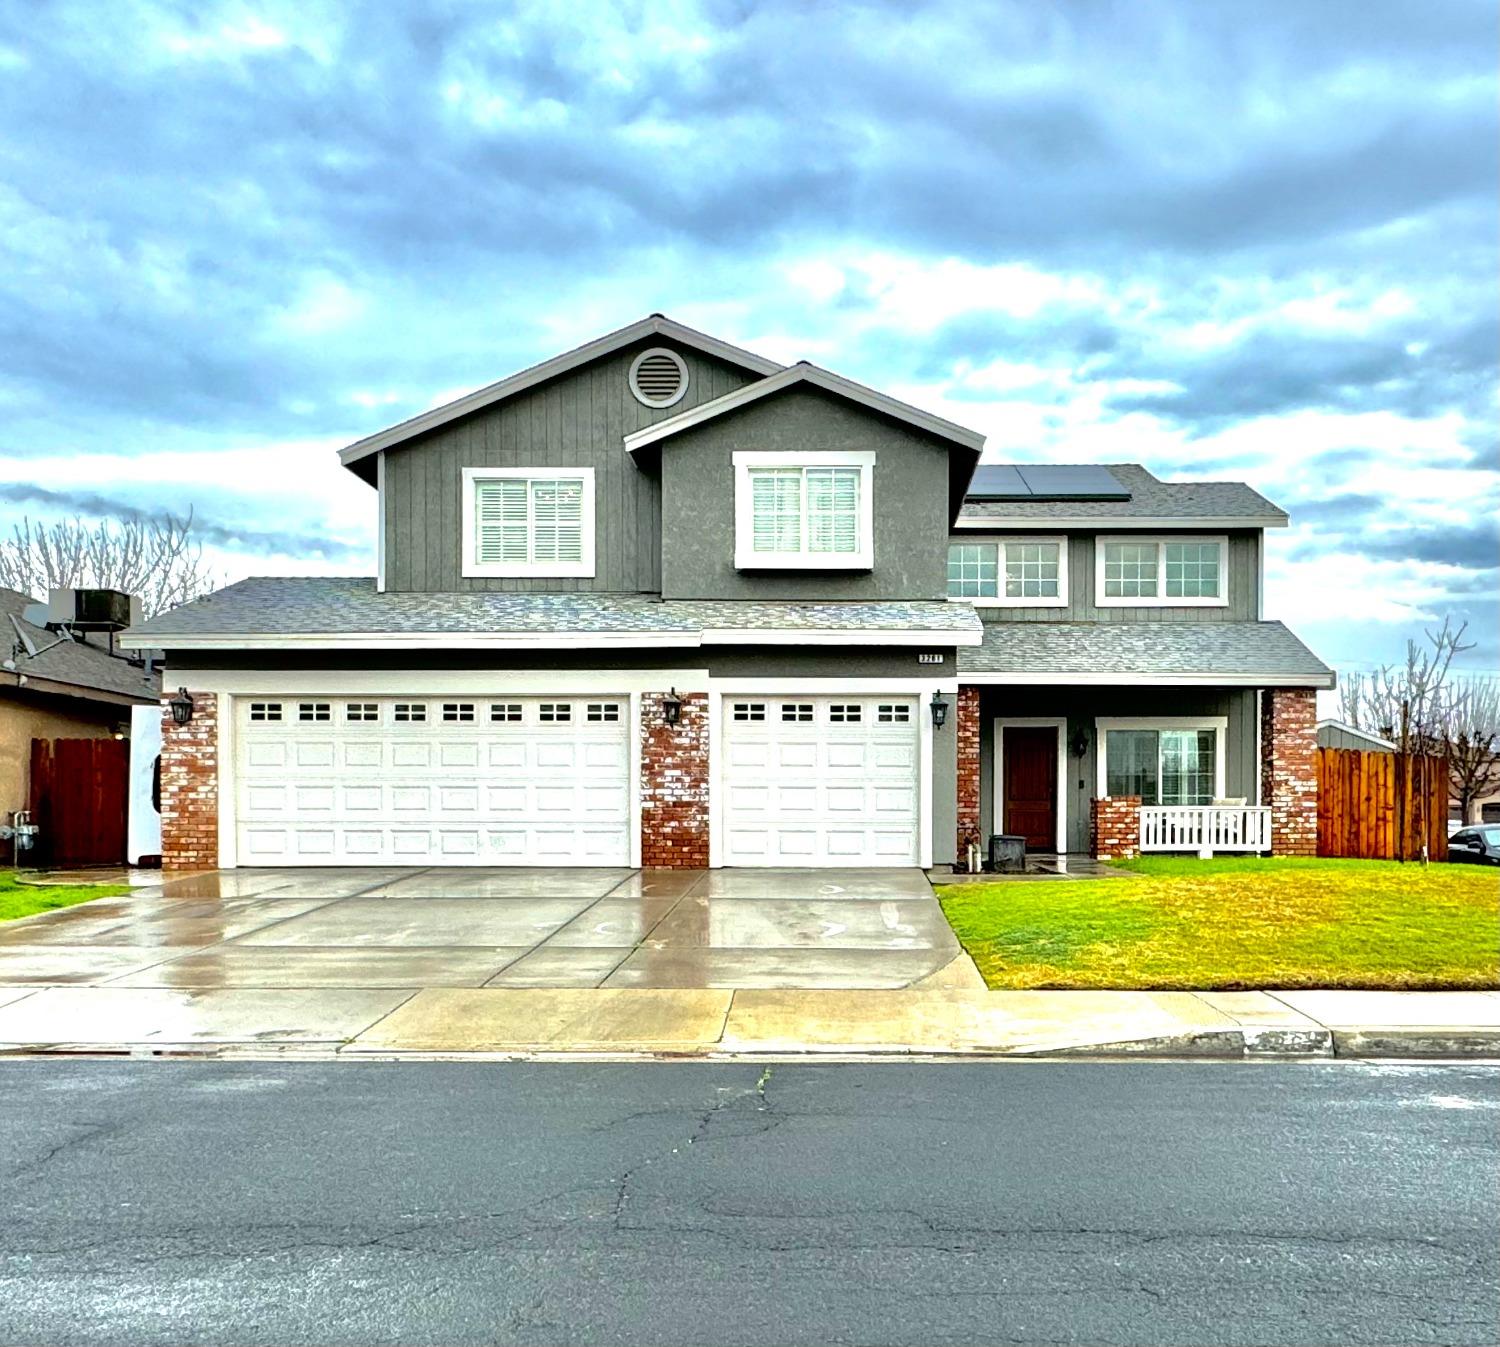 Photo of 3261 Fountain Plaza Ct in Hanford, CA